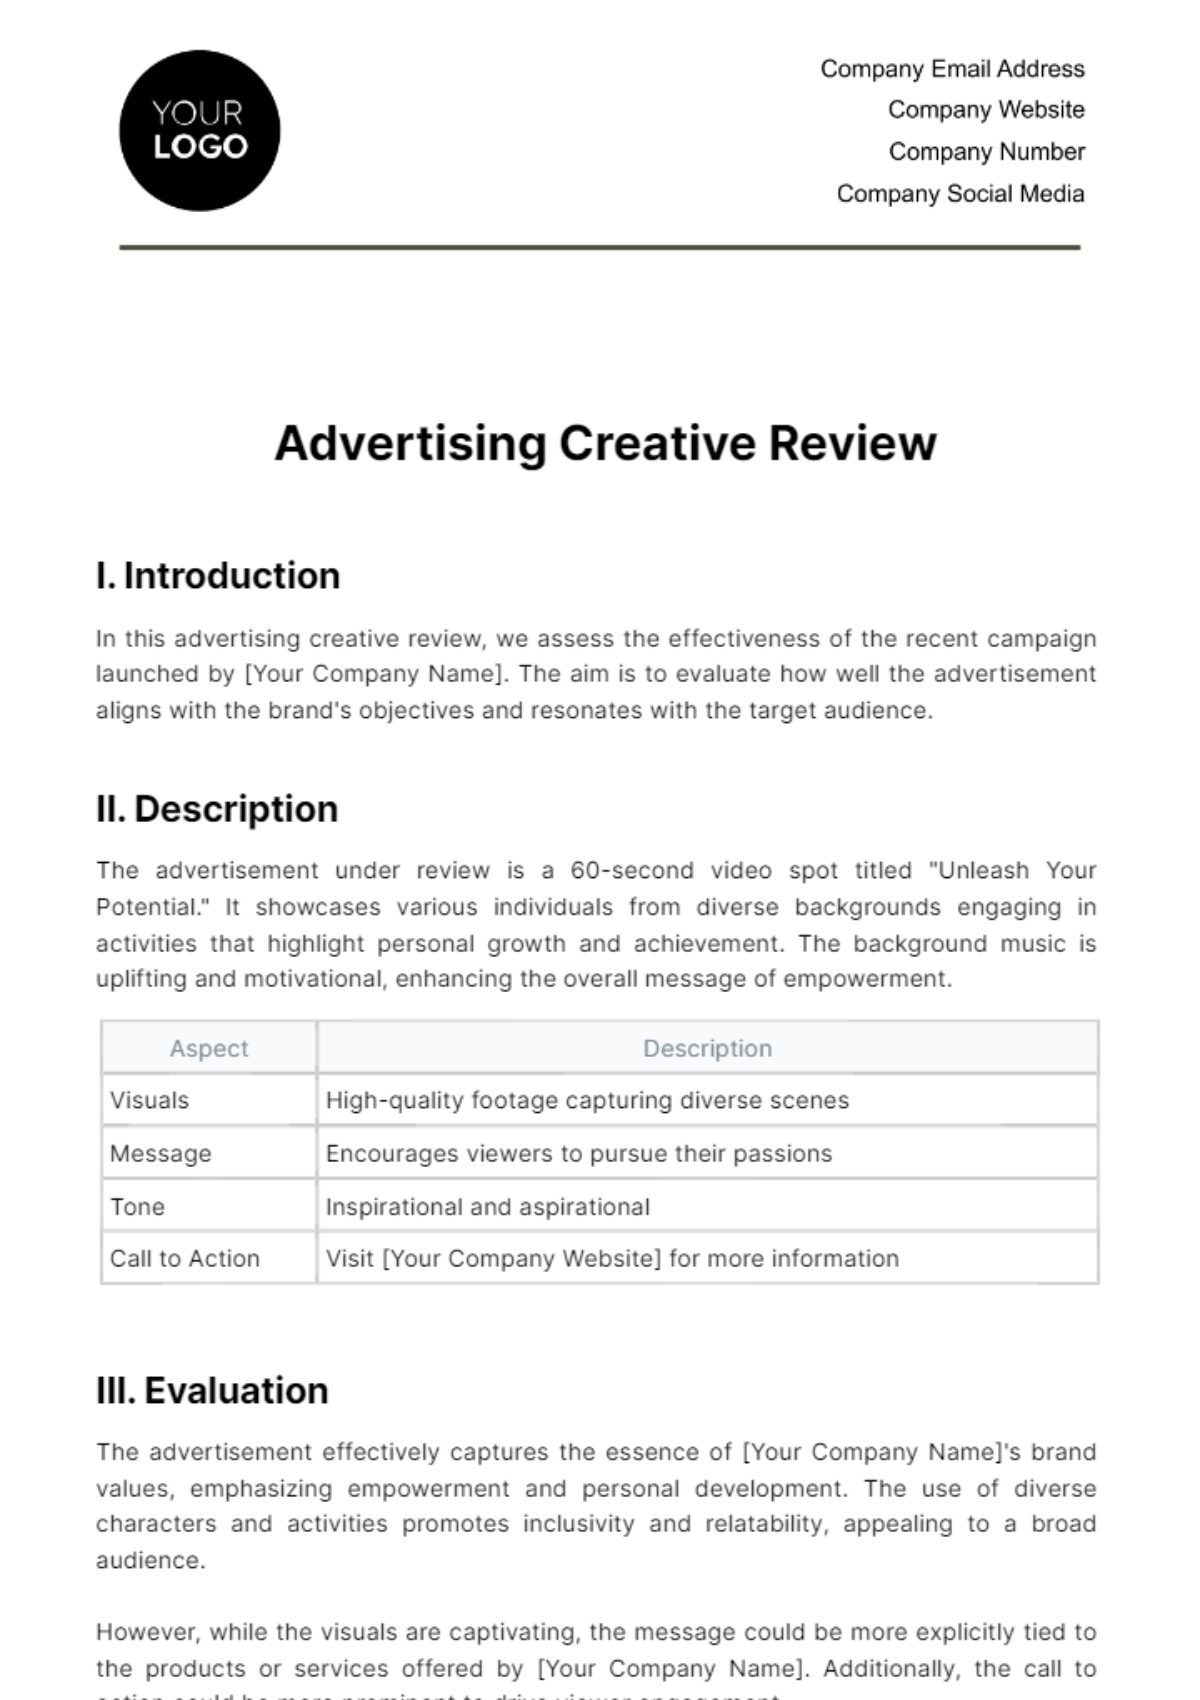 Advertising Creative Review Template